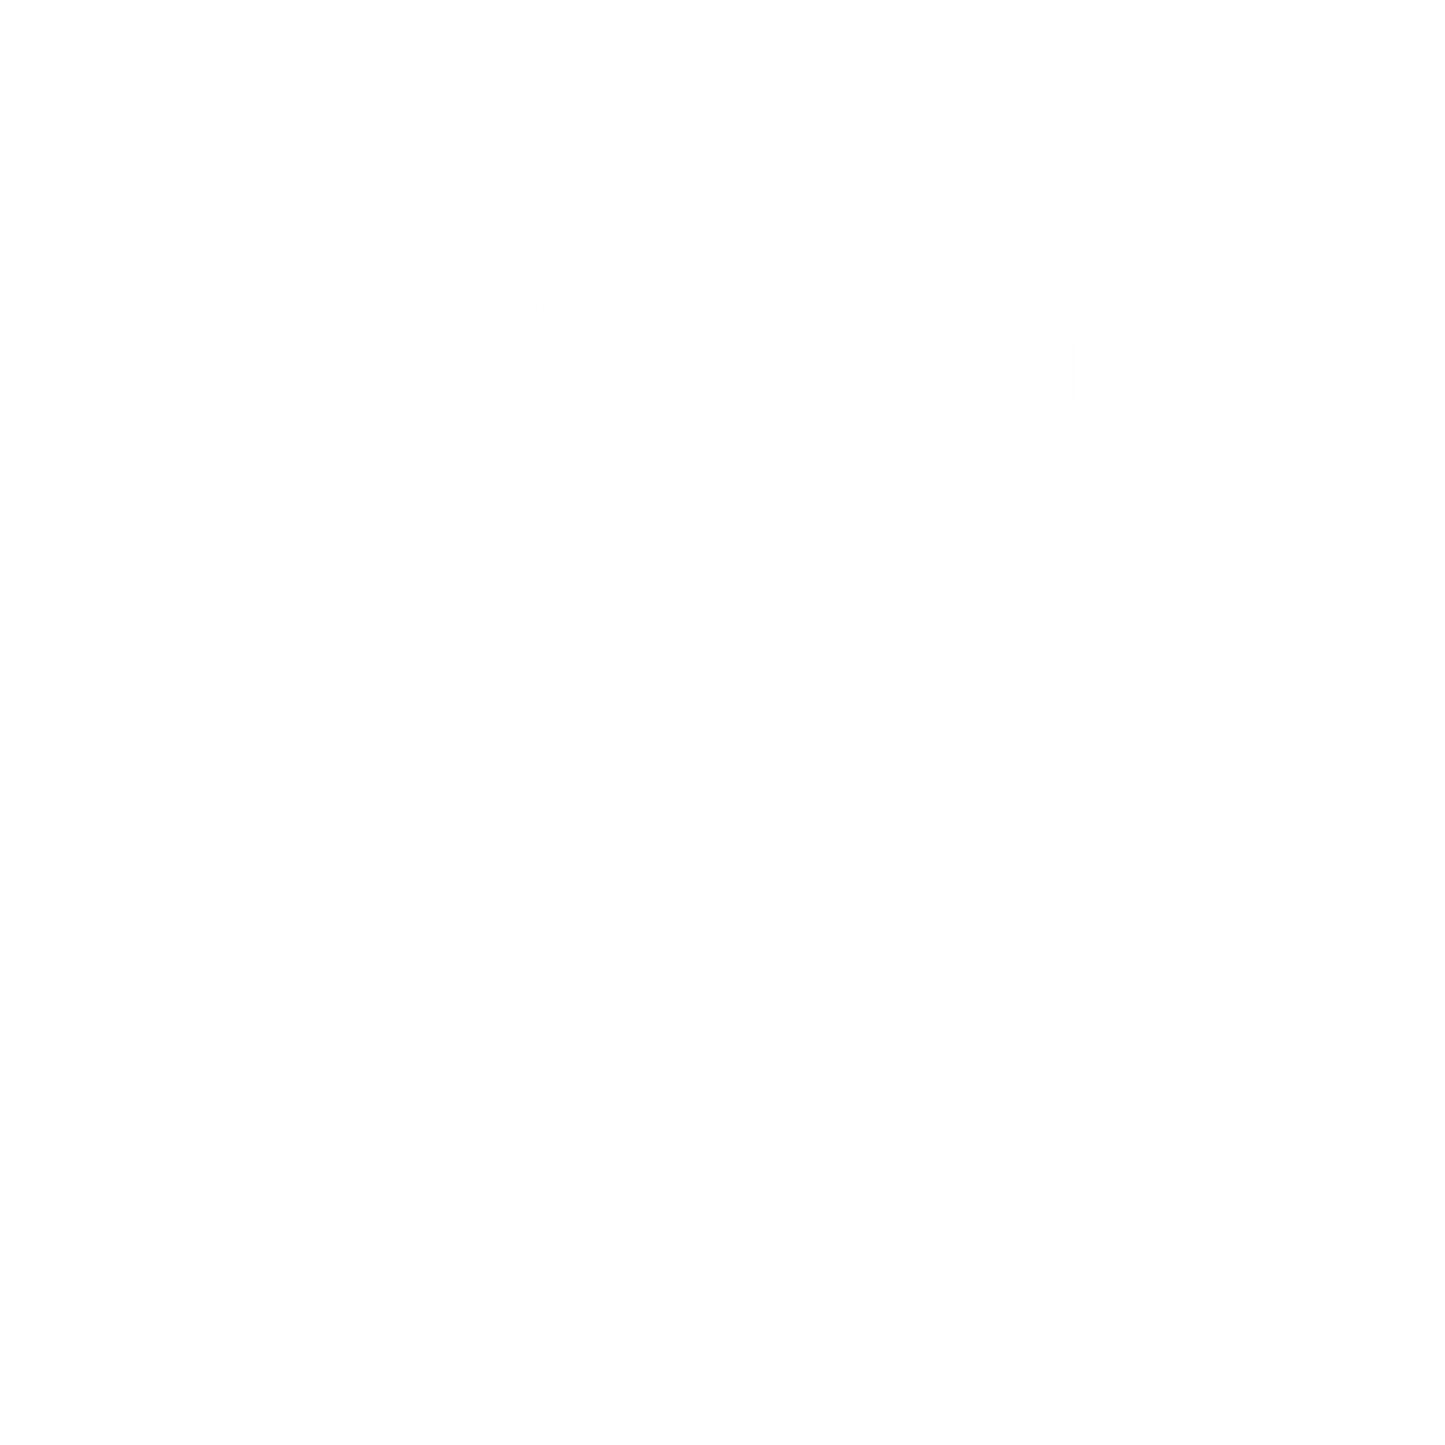 RETIRED don't care don't ask